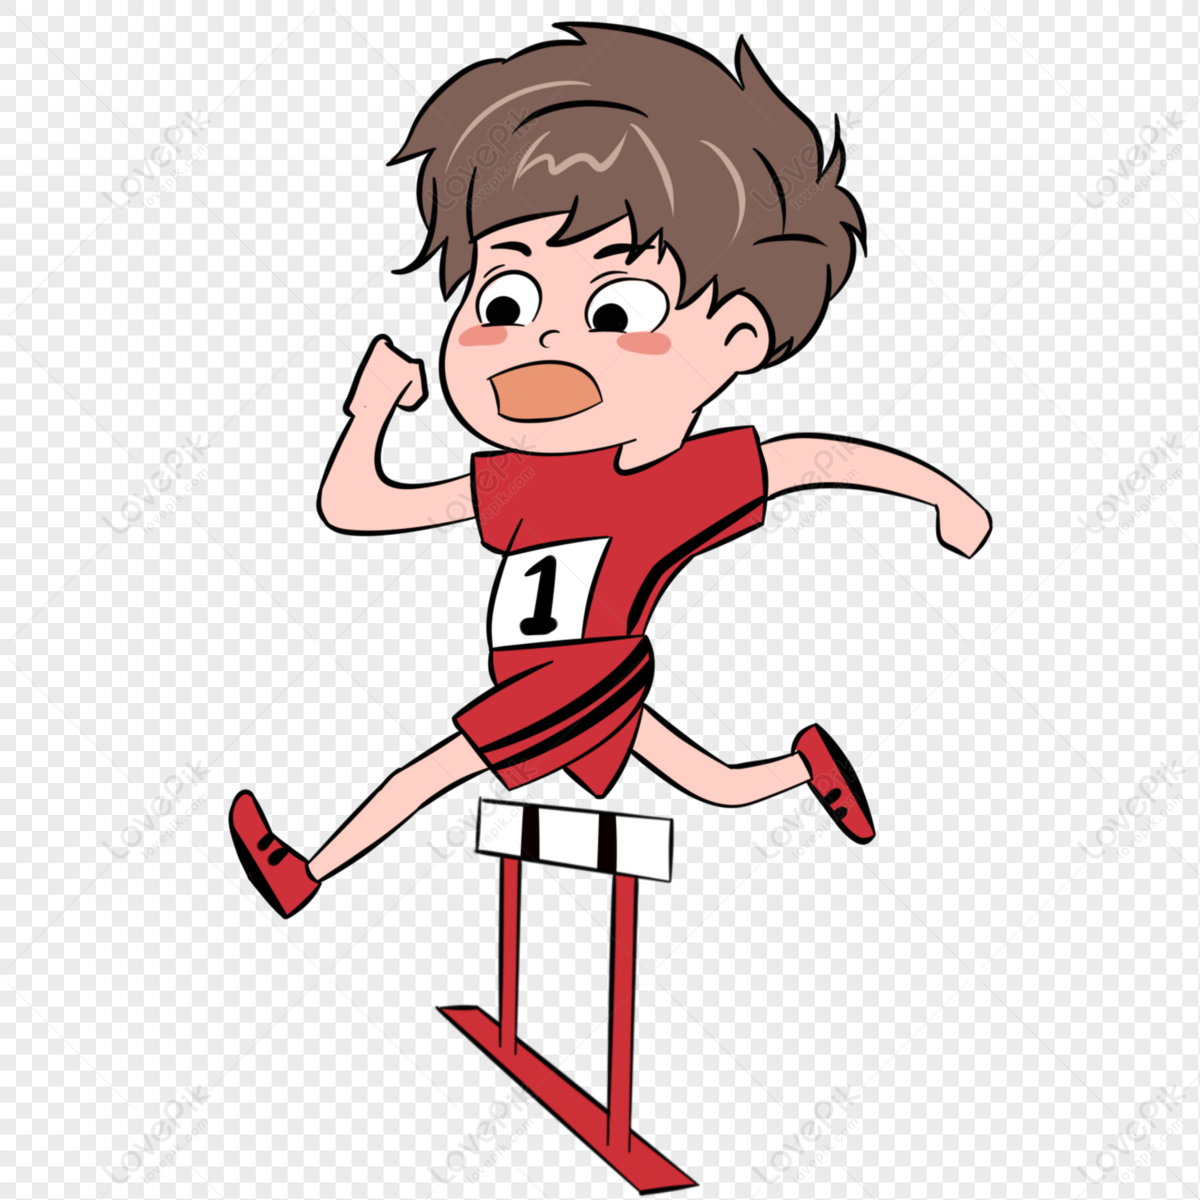 Hurdle Athlete Character Cartoon Hand Drawn PNG Image Free Download And  Clipart Image For Free Download - Lovepik | 401382751